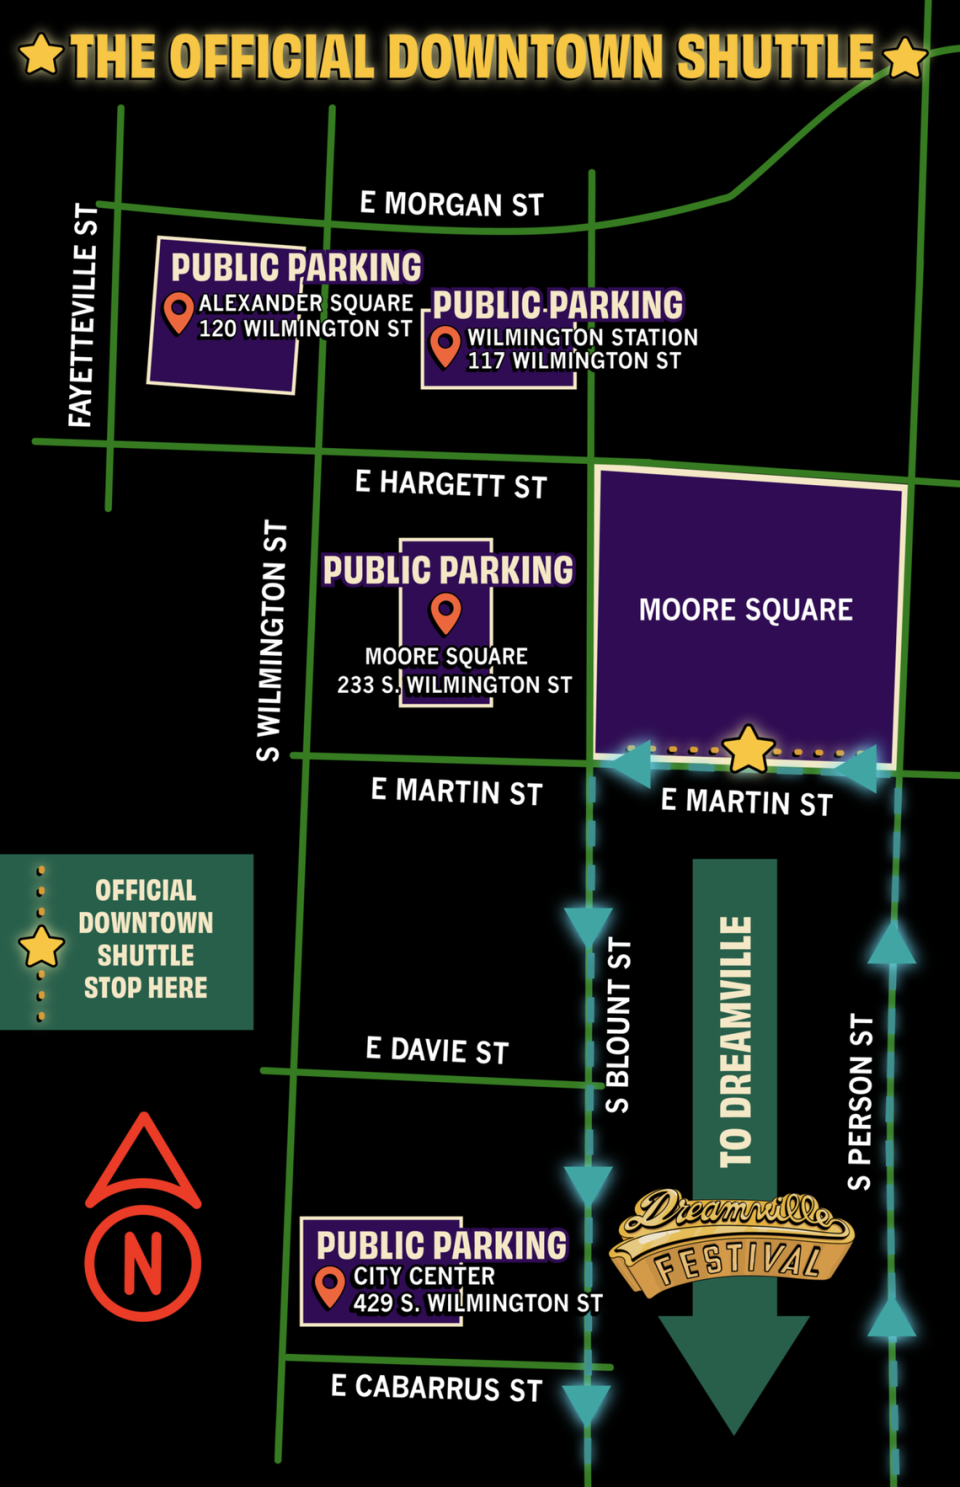 The official Dreamville Fest shuttle begins at Moore Square in downtown Raleigh along E. Martin Street. There is a public parking deck at 429 S. Wilmington Street. This map shows where the shuttle will take festival-goers and other parking options near the pick-up point.